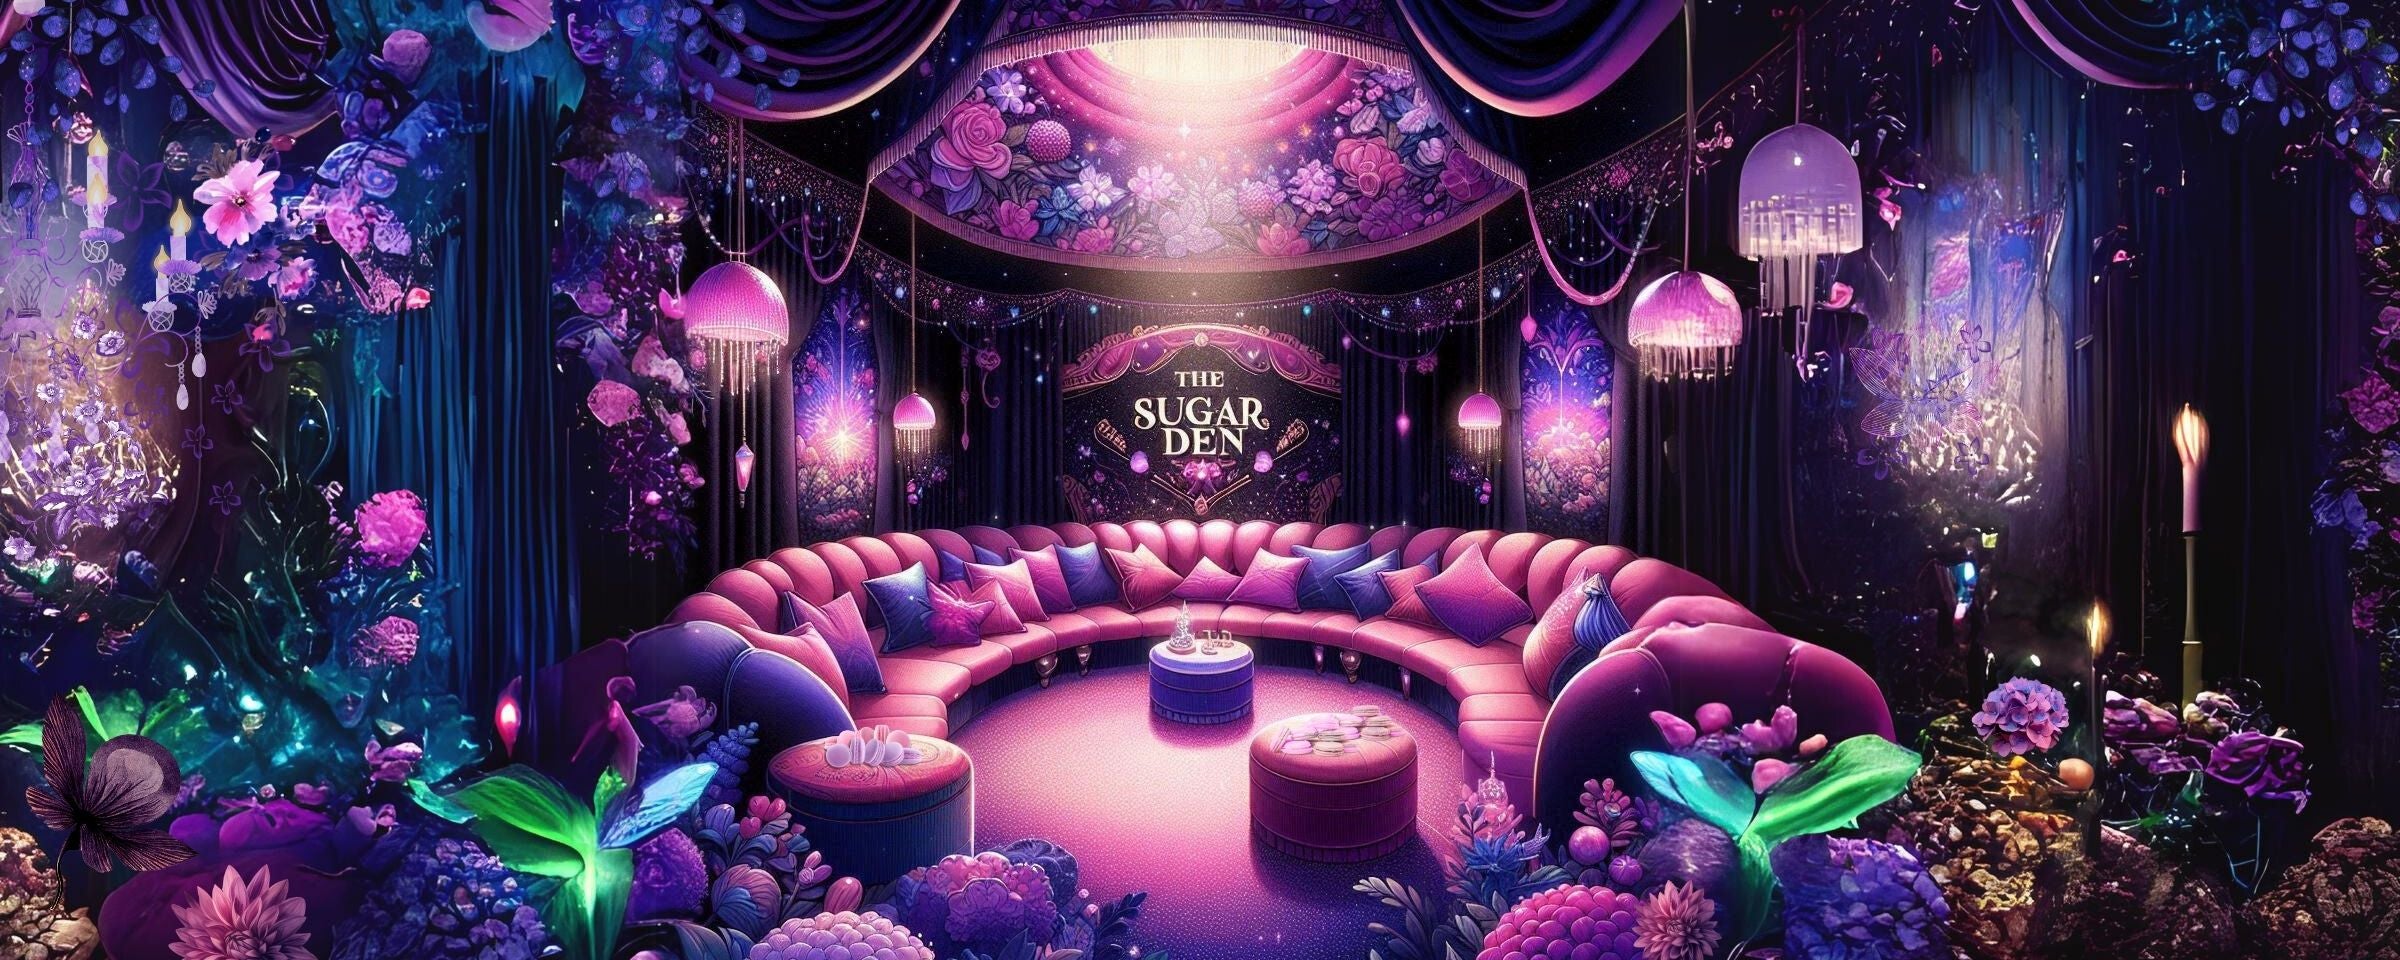 Image of sumptuous and glamorously pink and purple decorated lounge called The Sugar Den